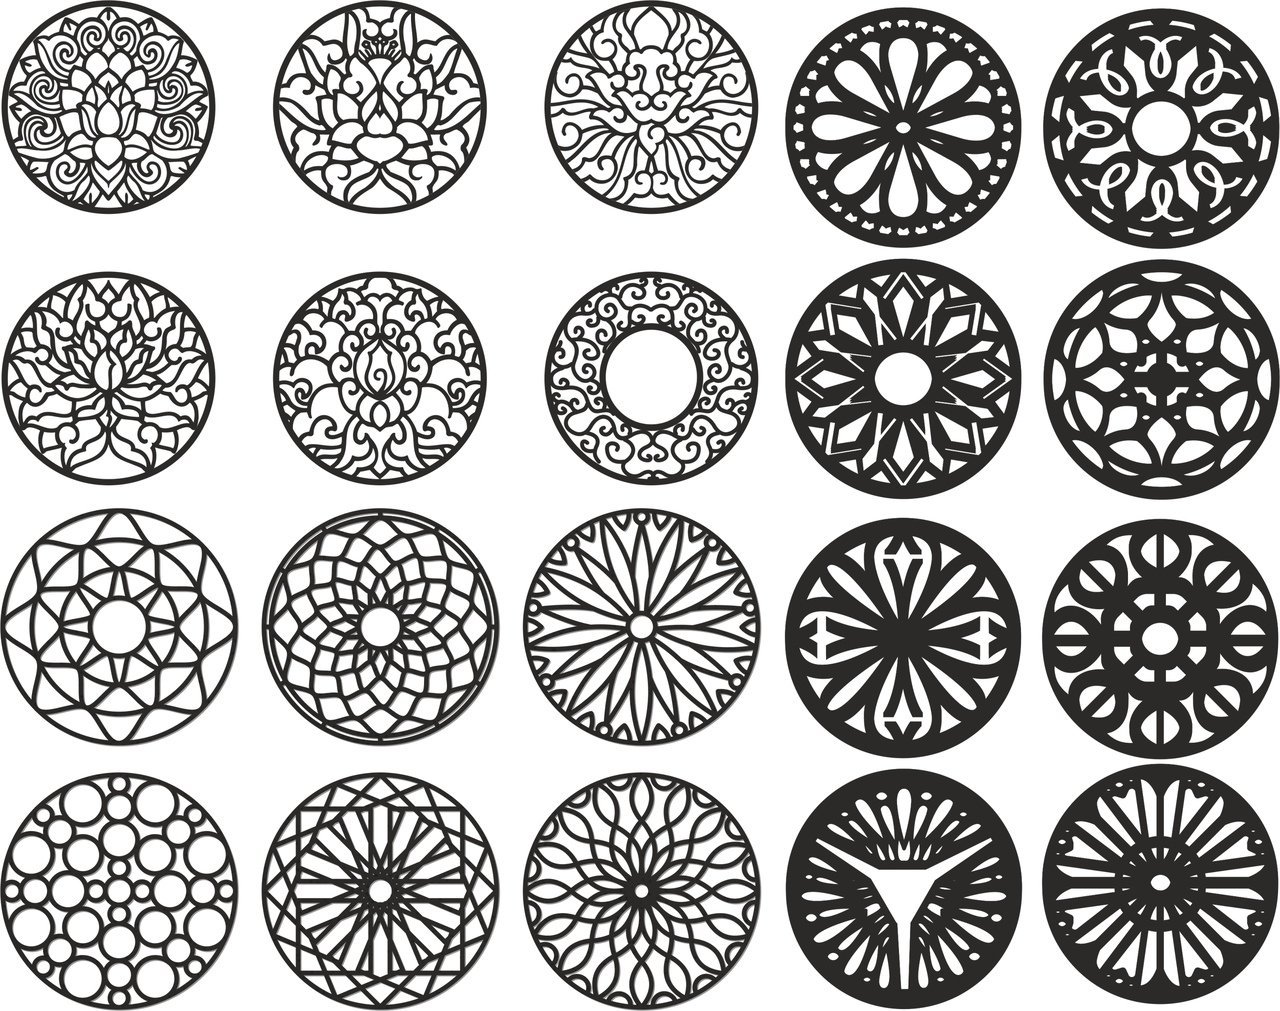 Download free cnc vector art design amp pattern files | FreeVector